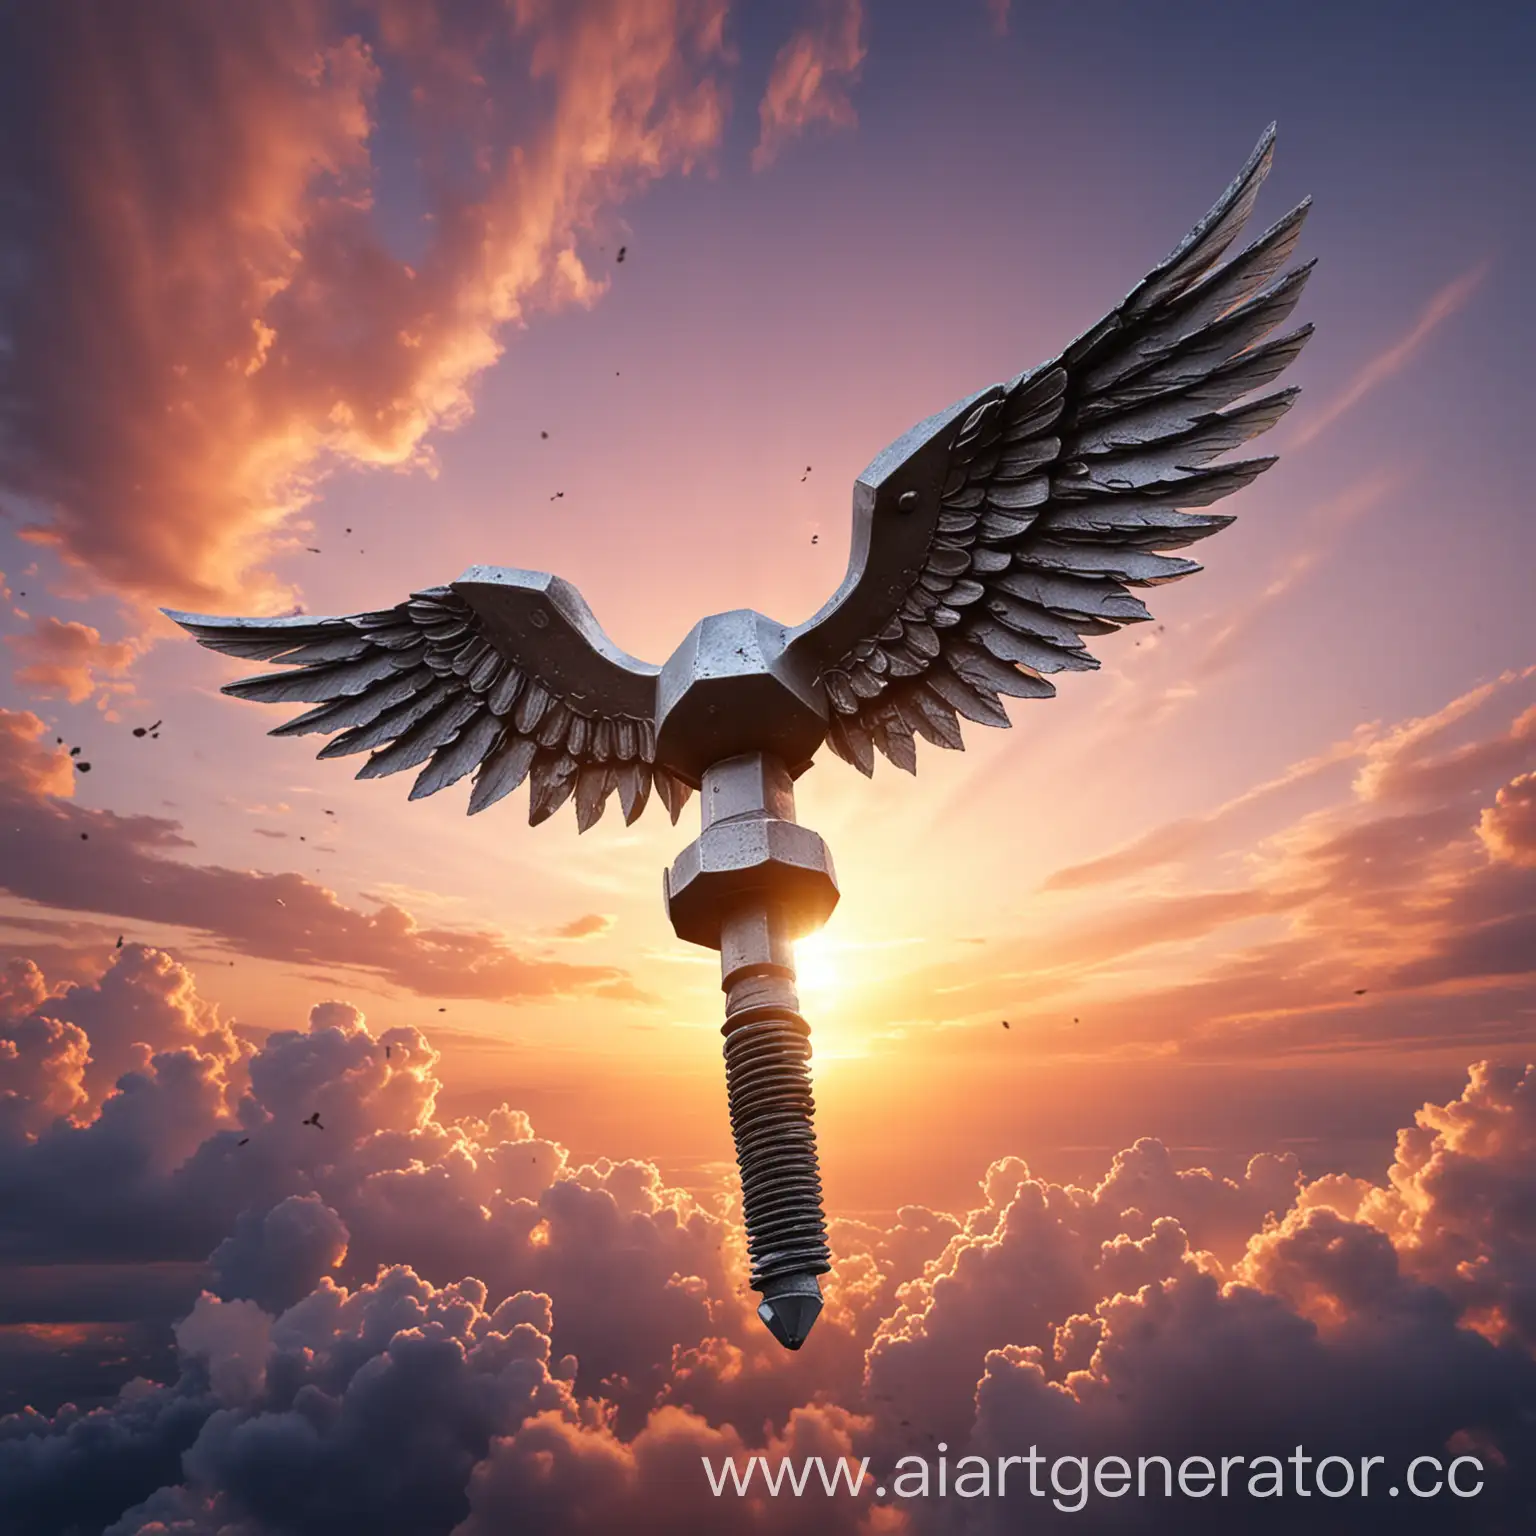 Flying-Iron-Bolt-with-Nuts-and-Wings-Against-Sunset-Sky